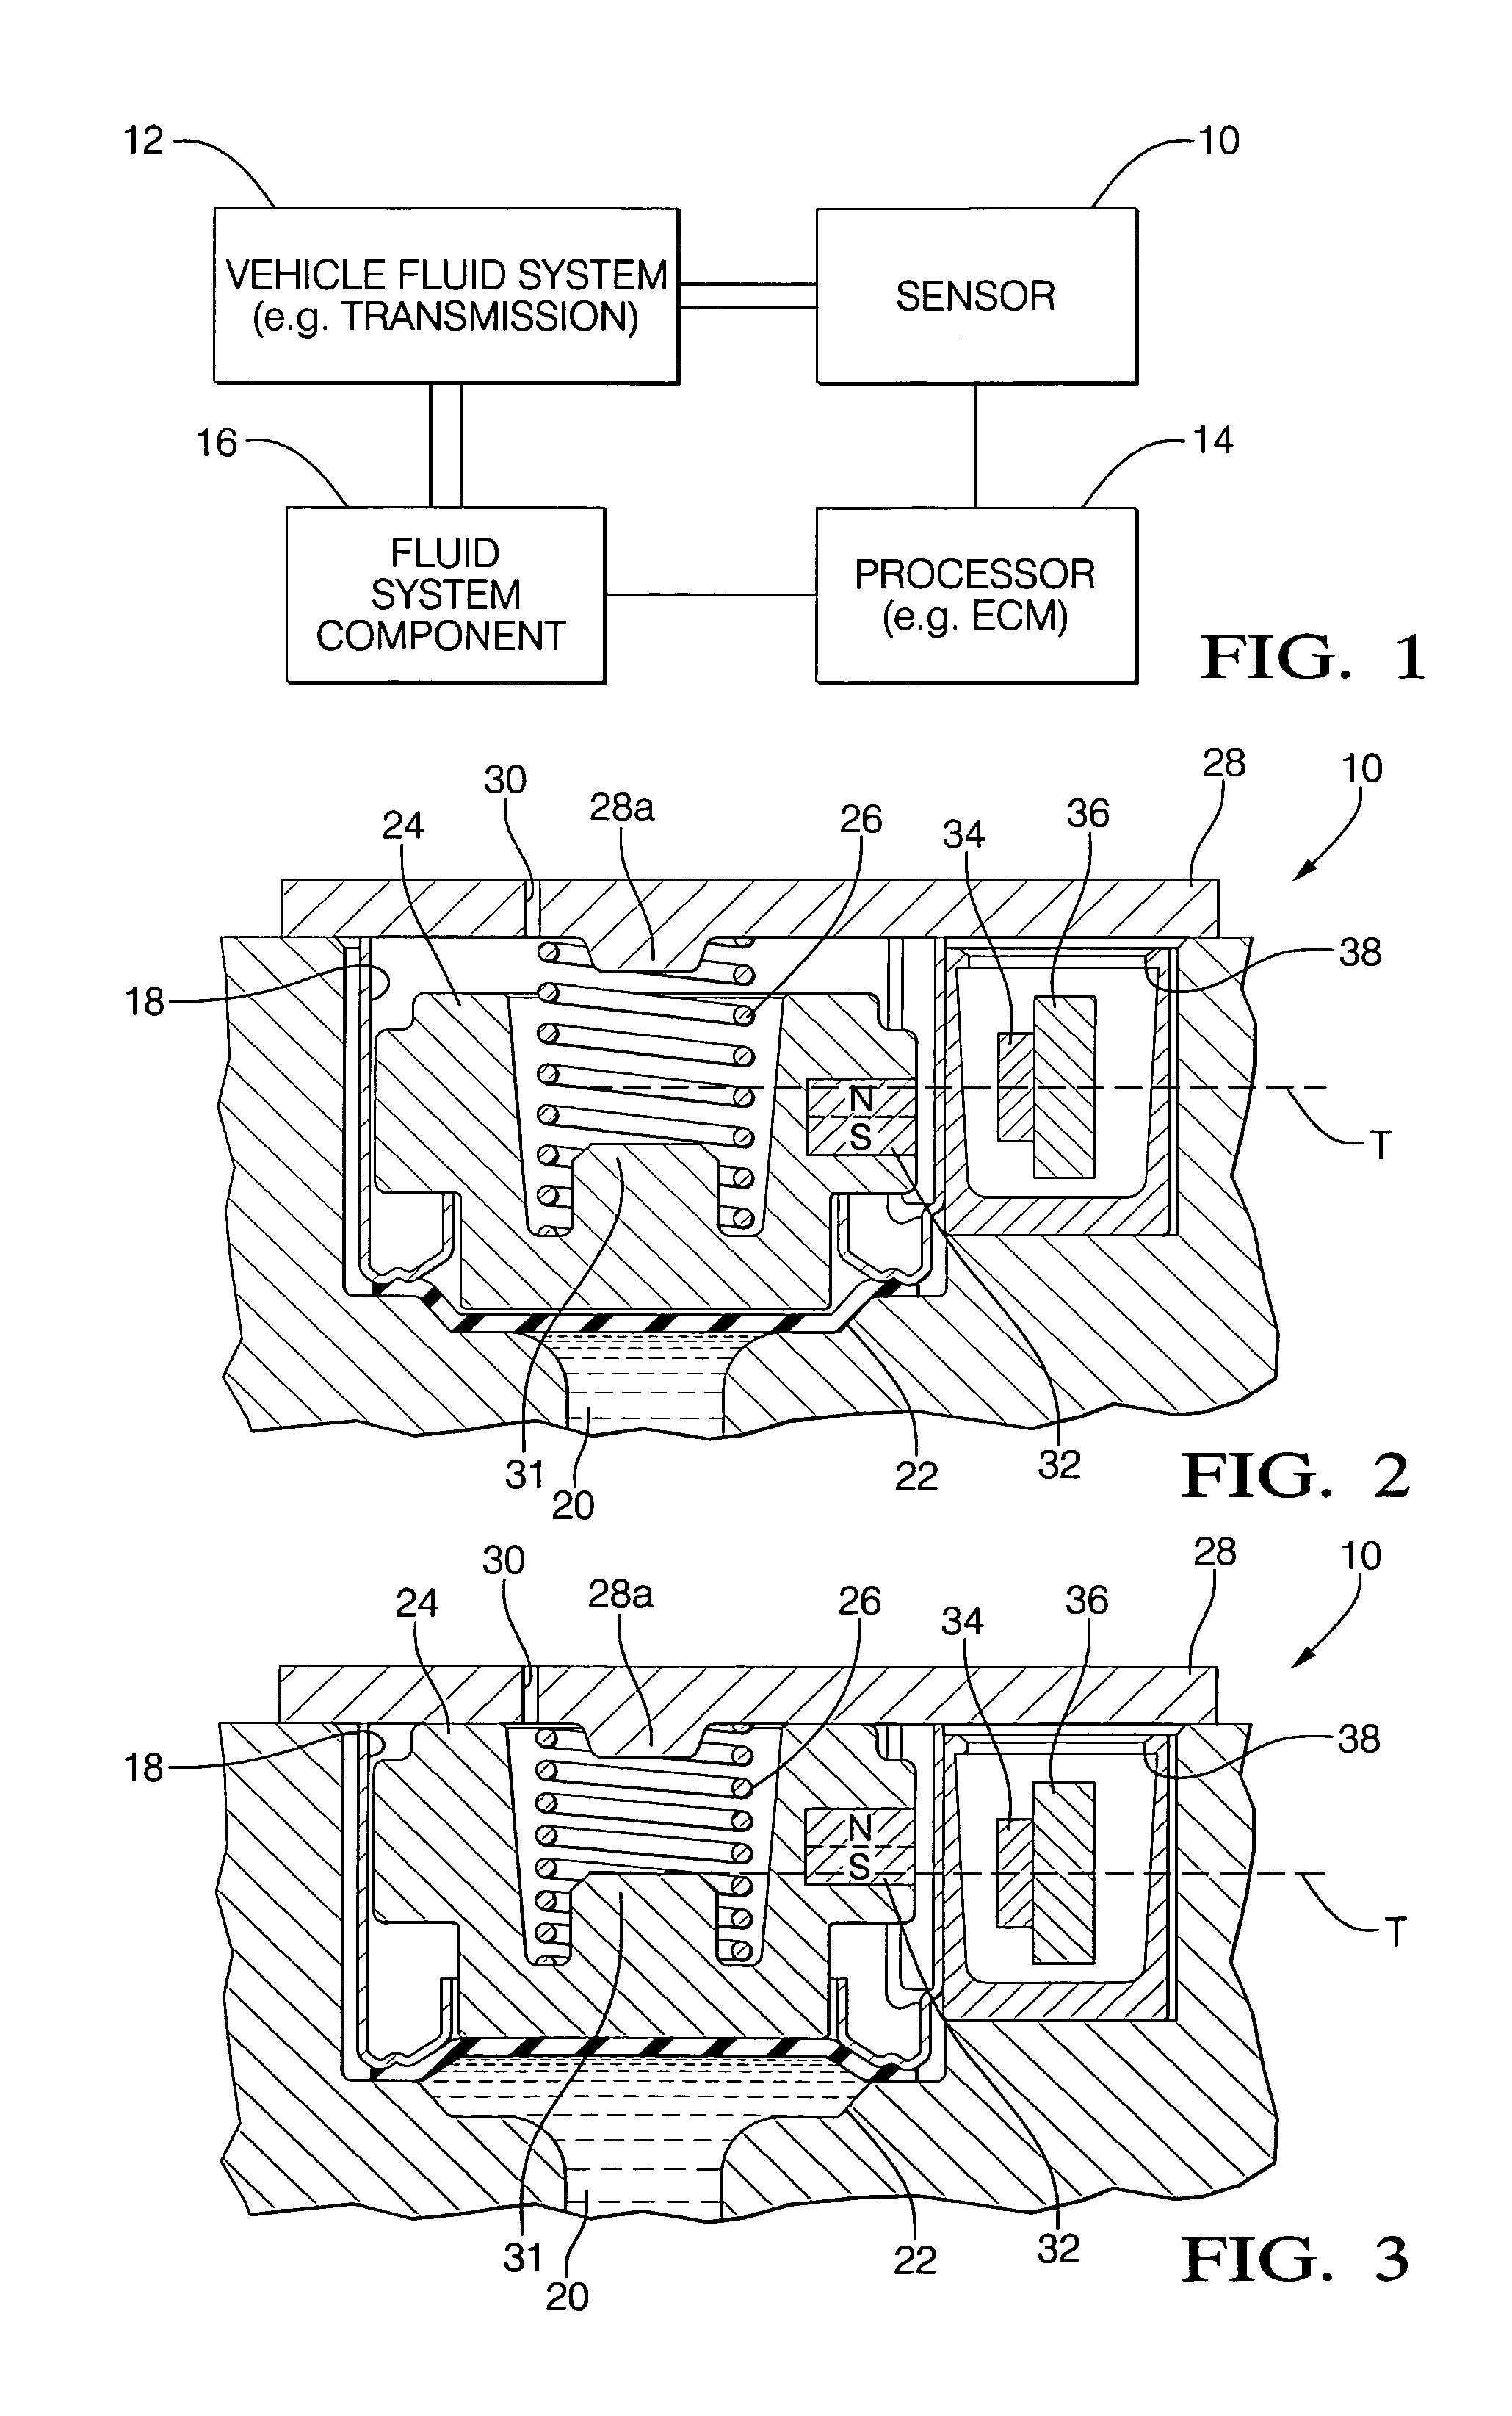 Non-contact pressure switch assembly